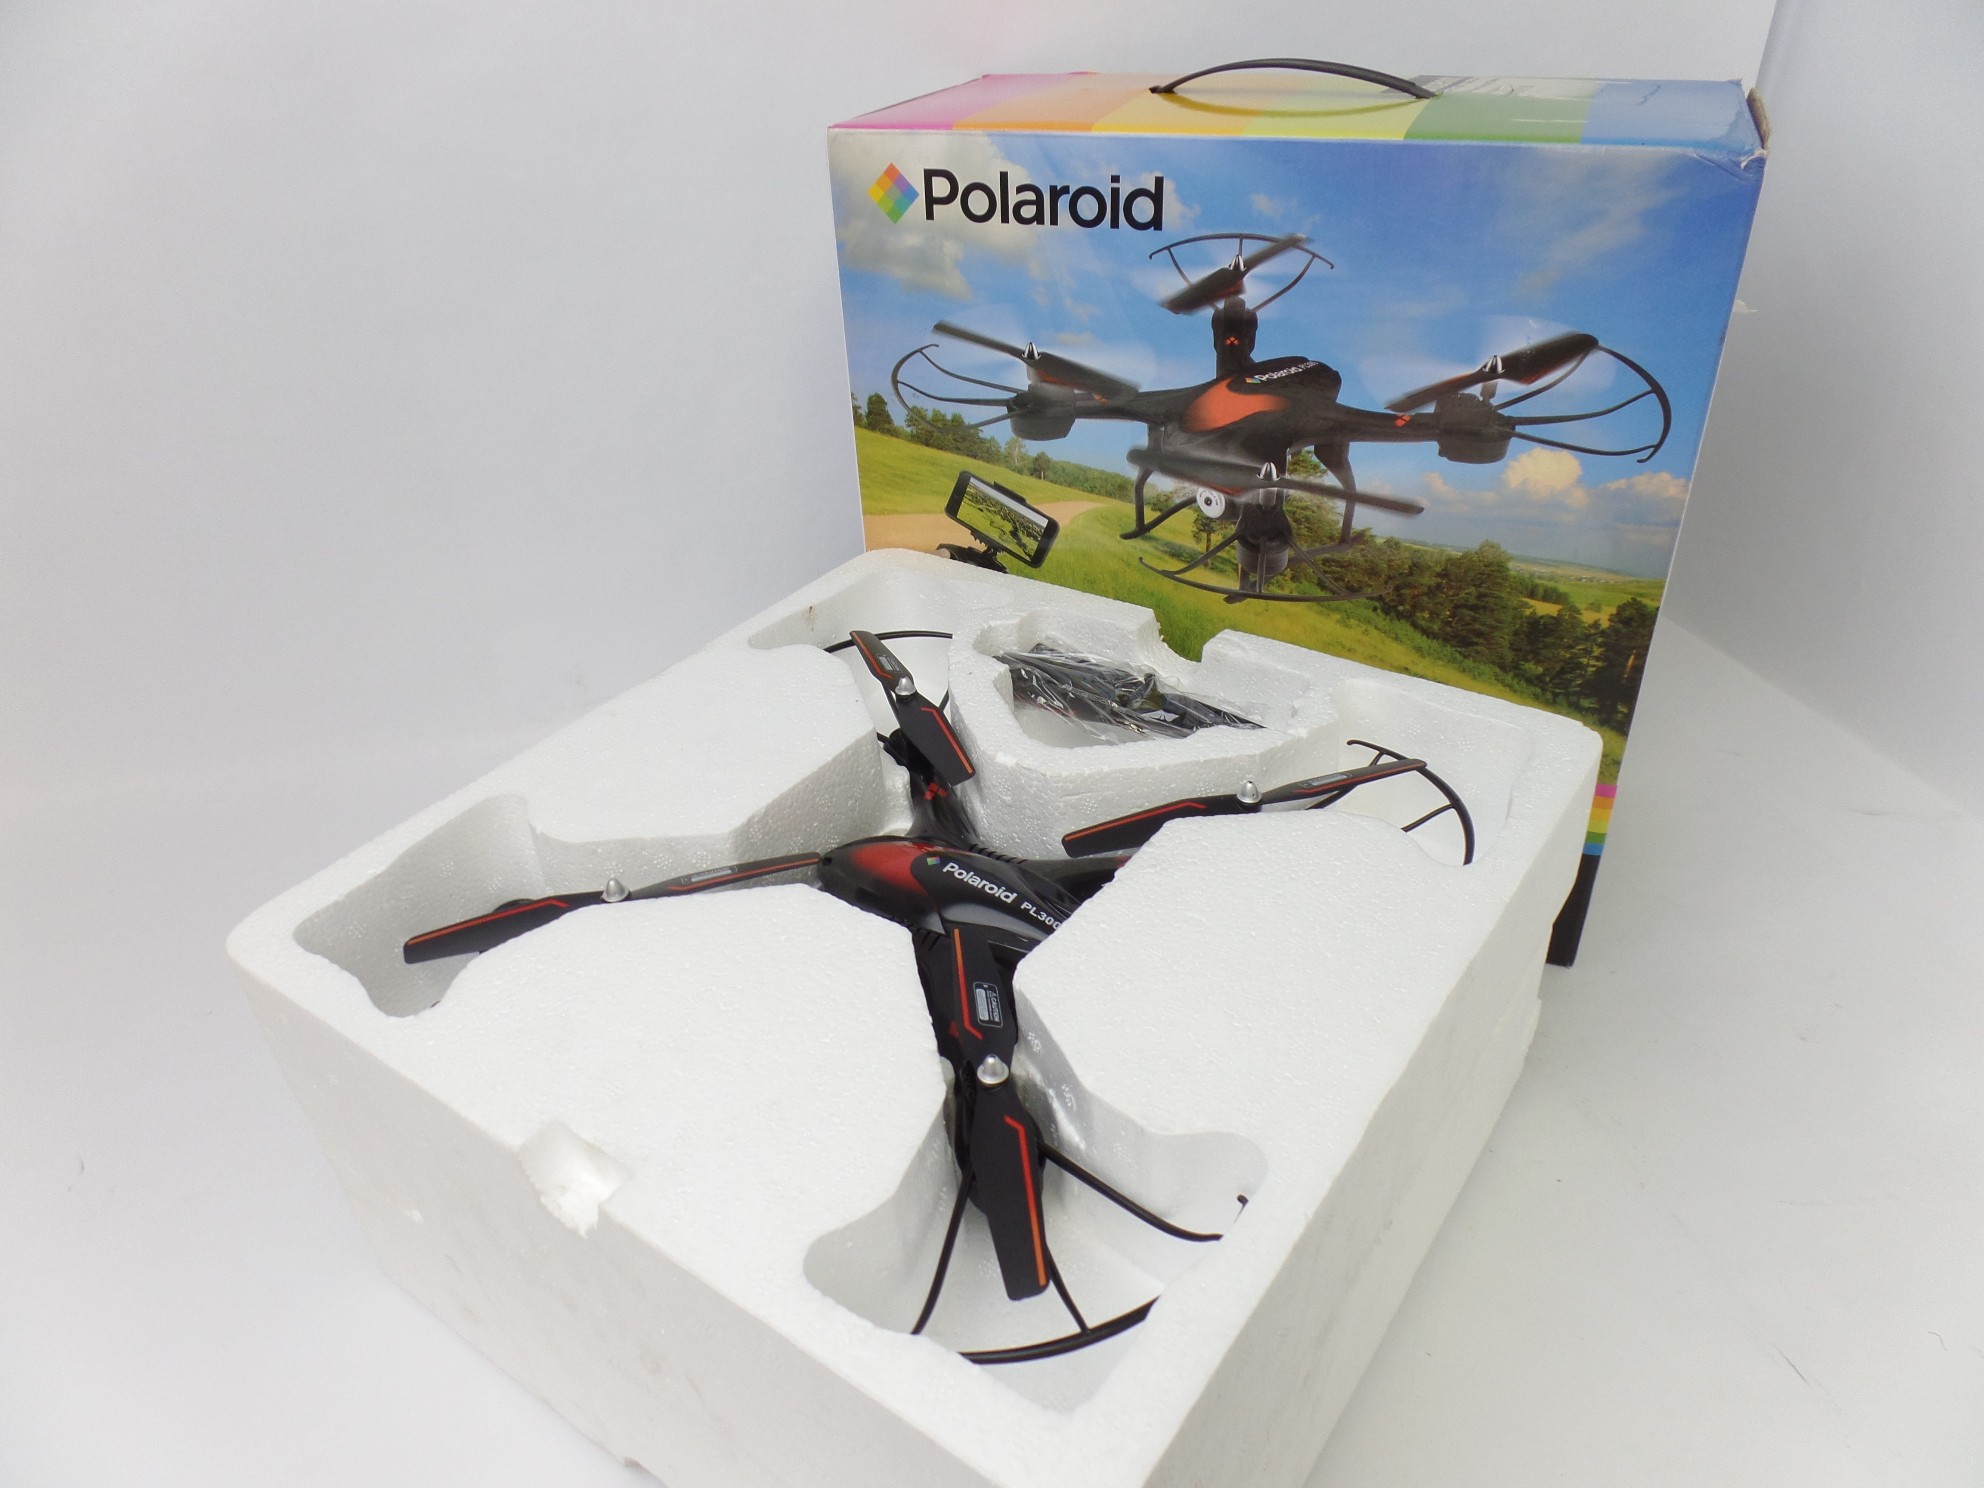  Polaroid PL300 WiFi Camera Drone 720p HD Live Streaming For Parts AS IS